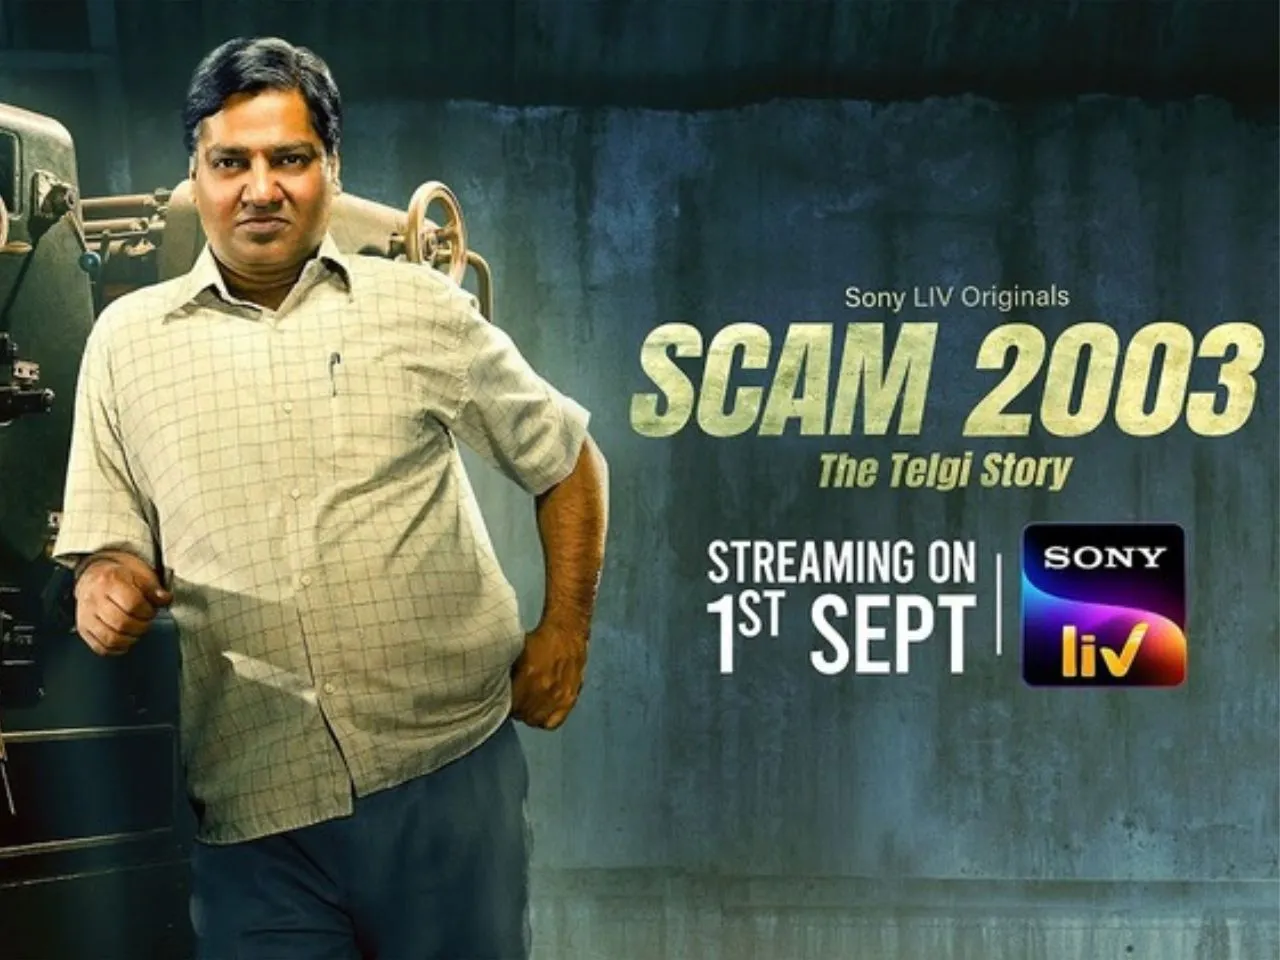 Scam 2003: The Telgi Story: Gagan Dev Riar gives career-defining performance in this dragged series